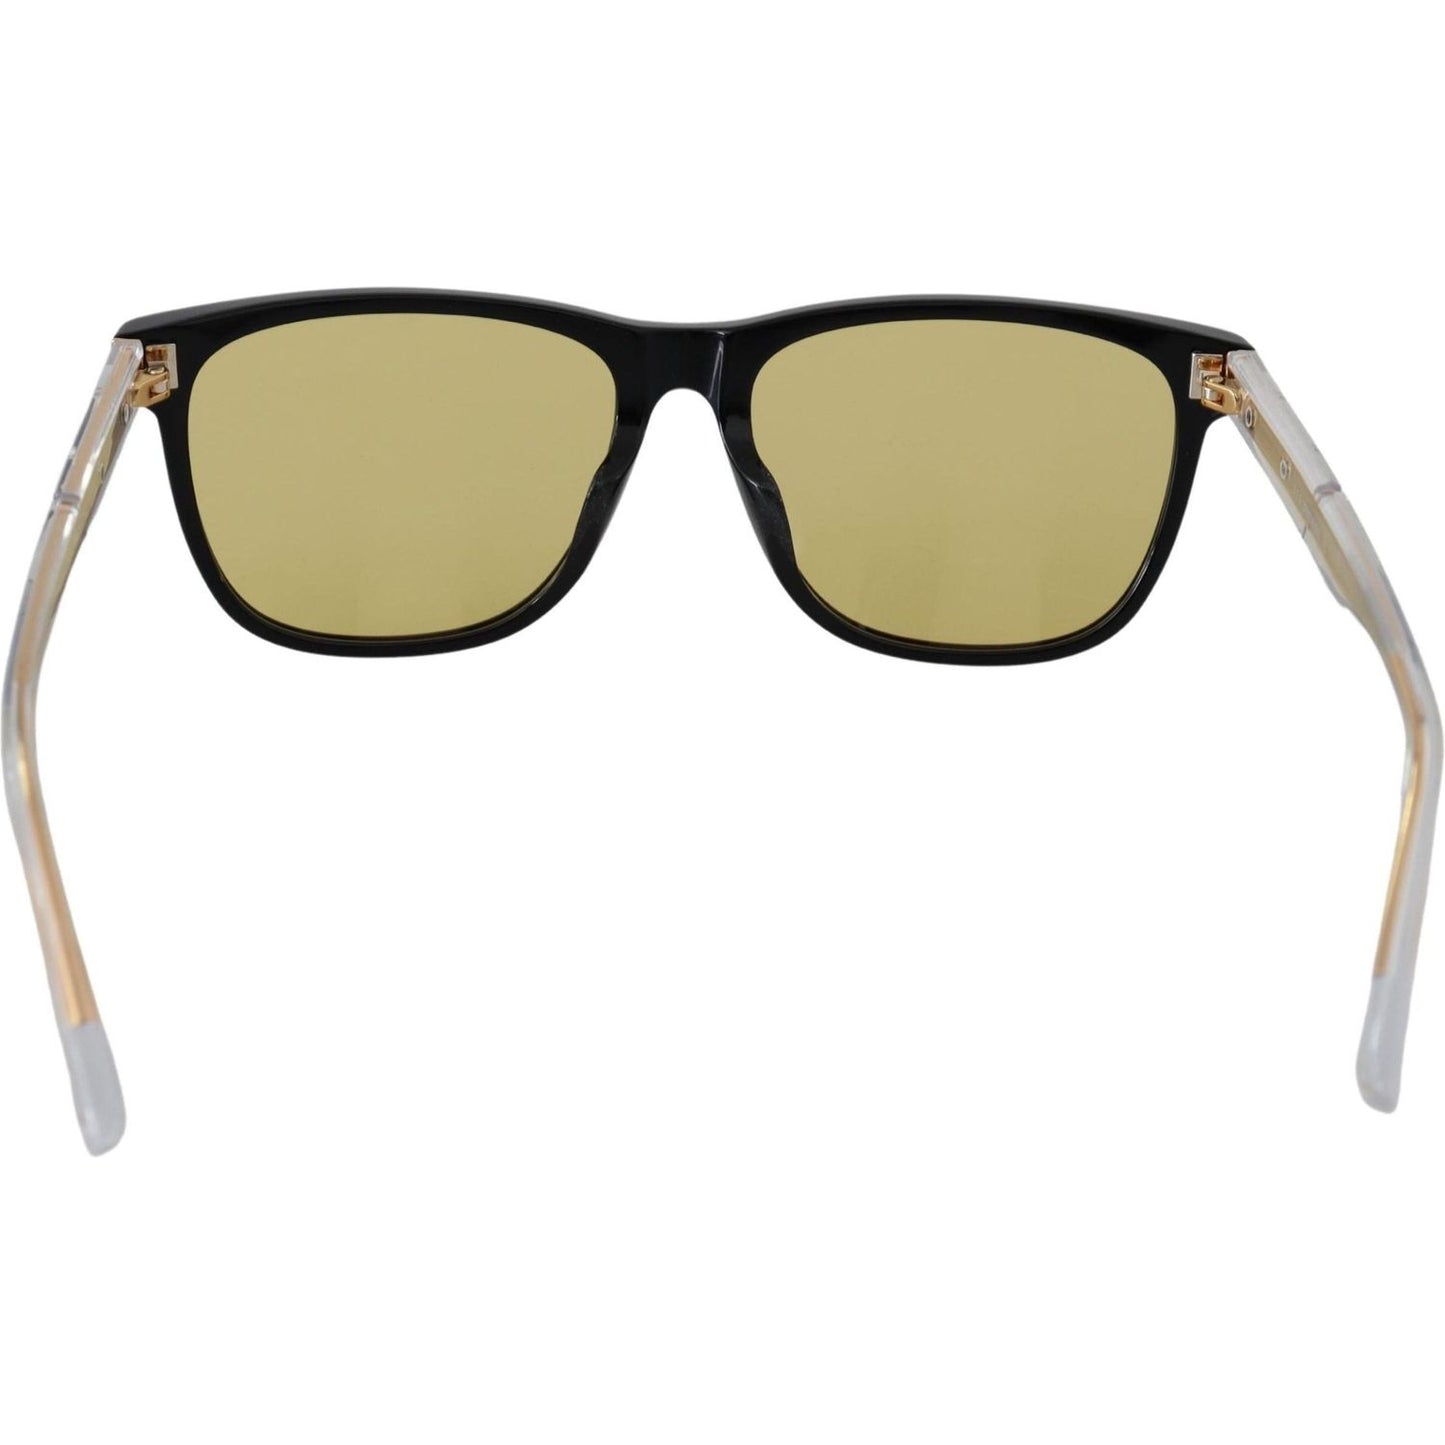 Chic Black Acetate Sunglasses with Yellow Lenses Diesel